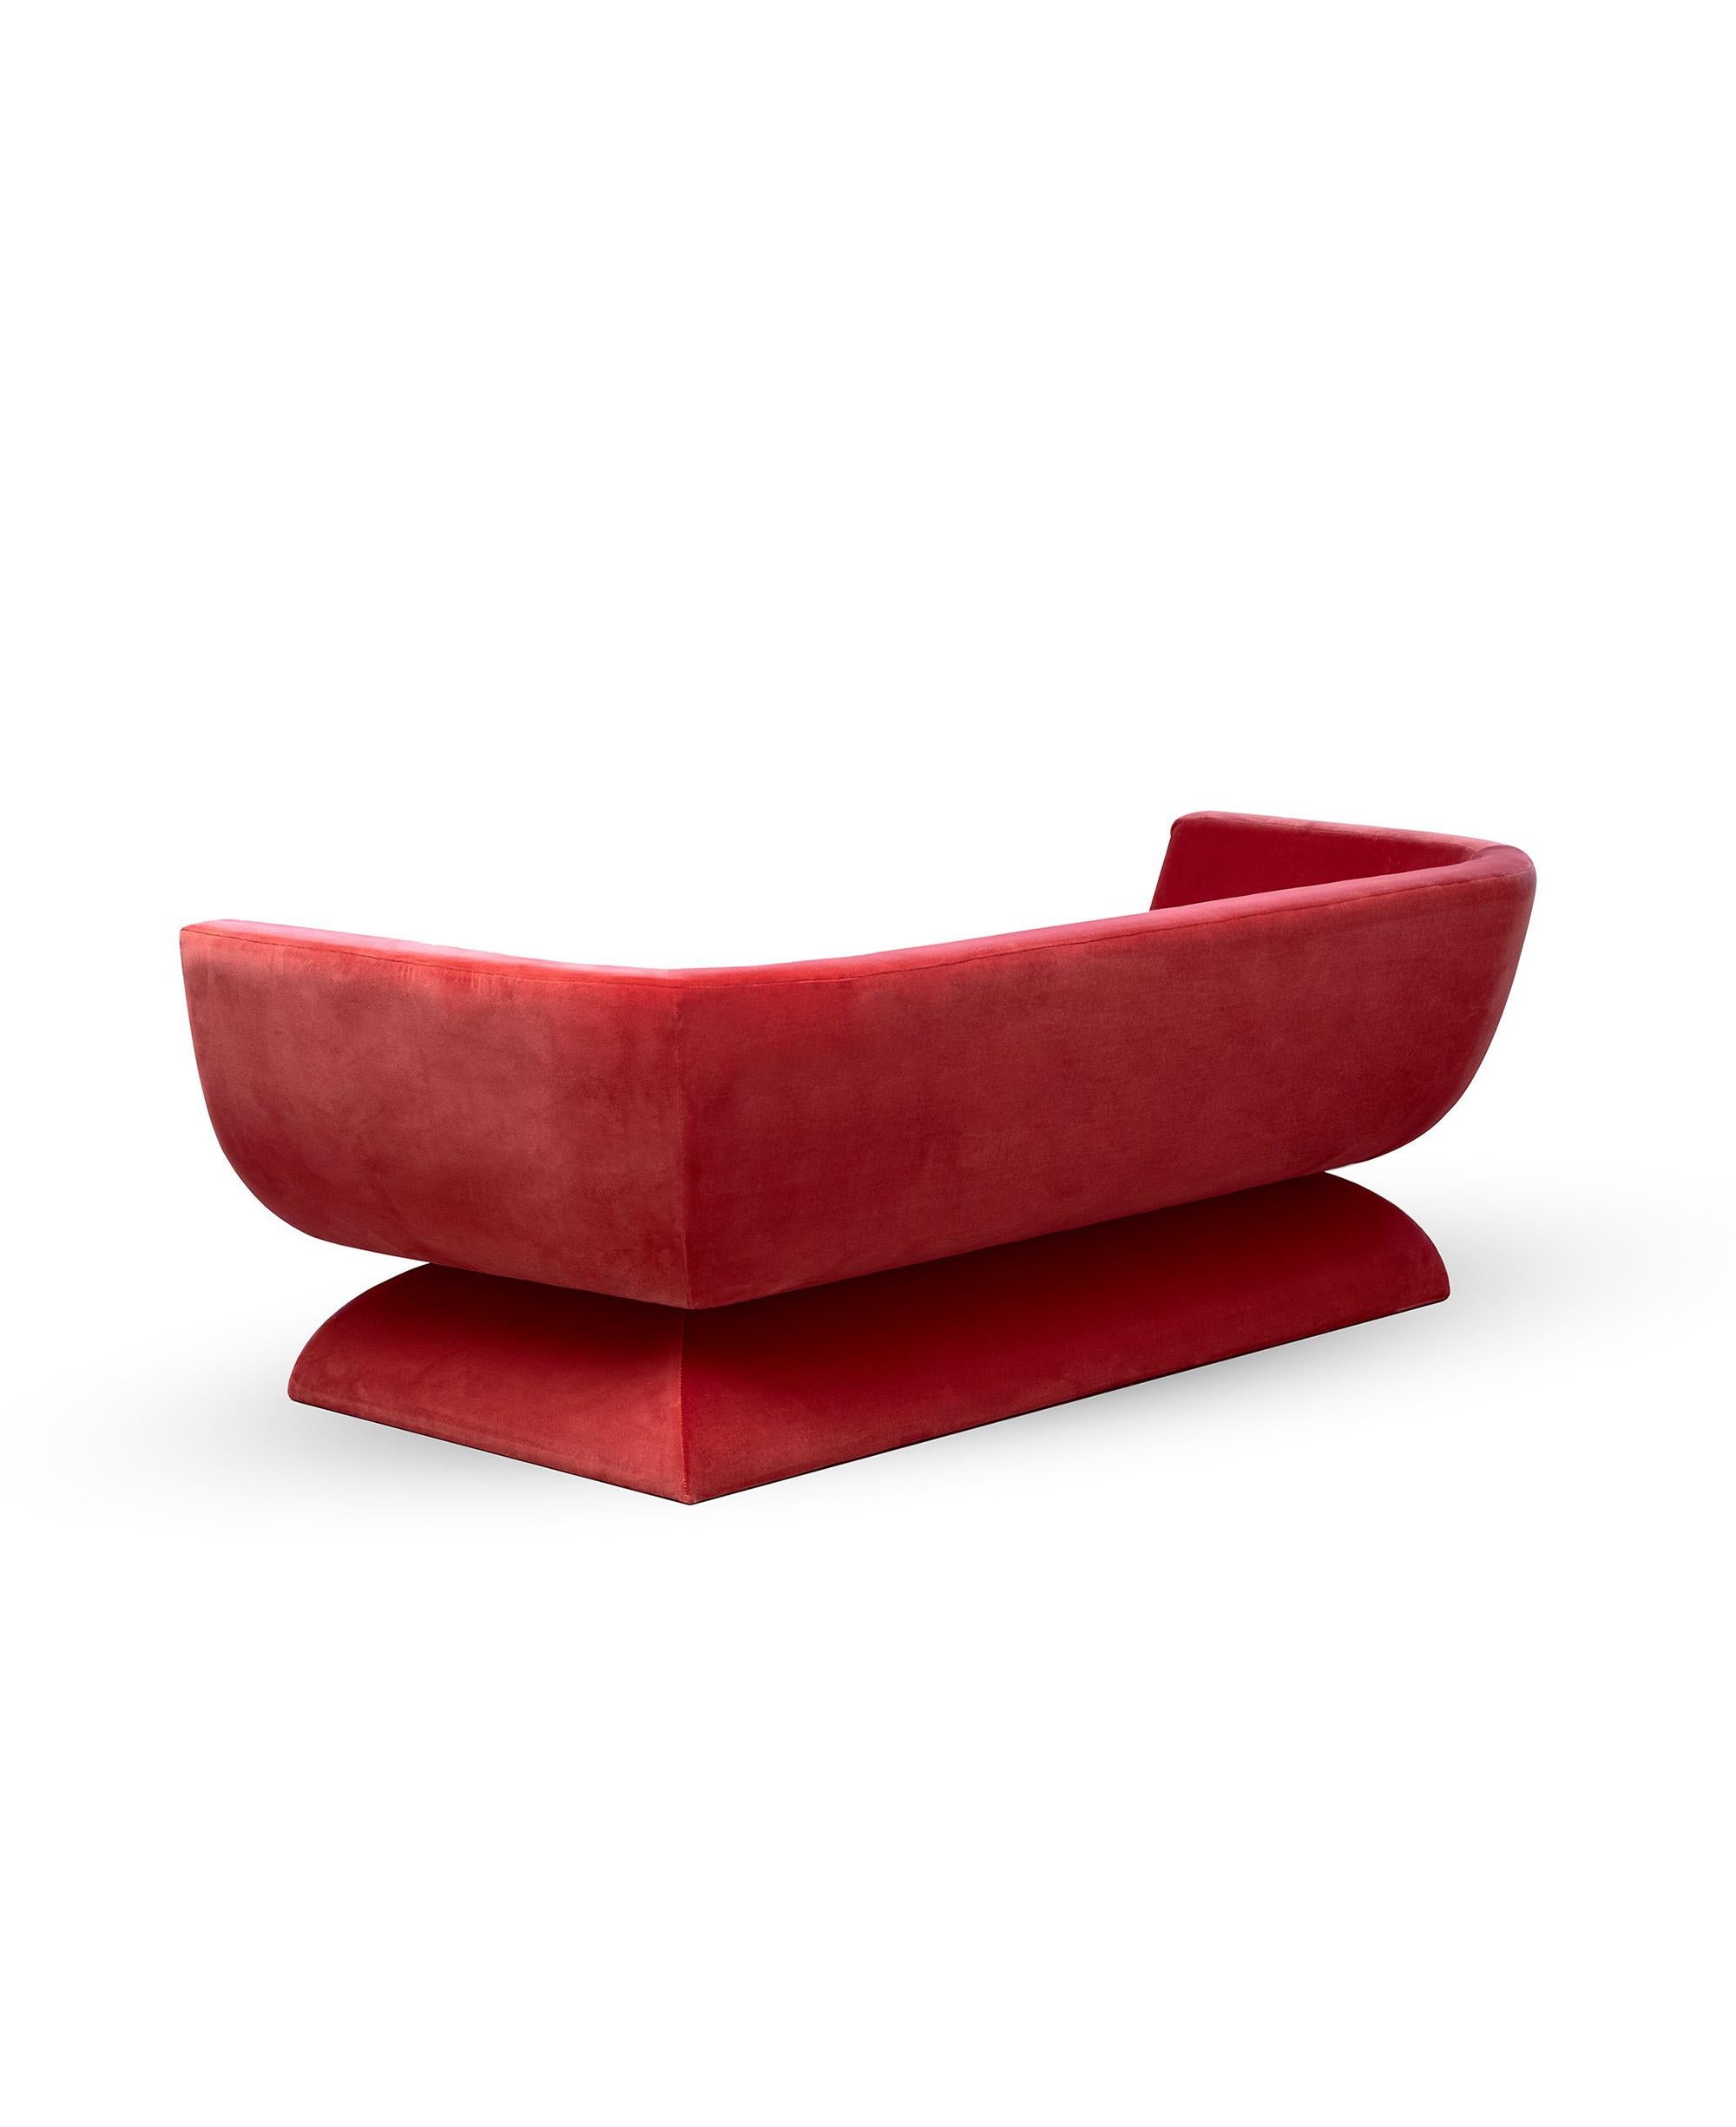 Oscar Sofa, Handcrafted in Portugal by Duistt

Inspired by the curved lines poetry of Oscar Niemeyer’s architecture, OSCAR sofa allures for its sensual and free-flowing curves. Like Niemeyer once said “Curves make up the entire Universe” as this